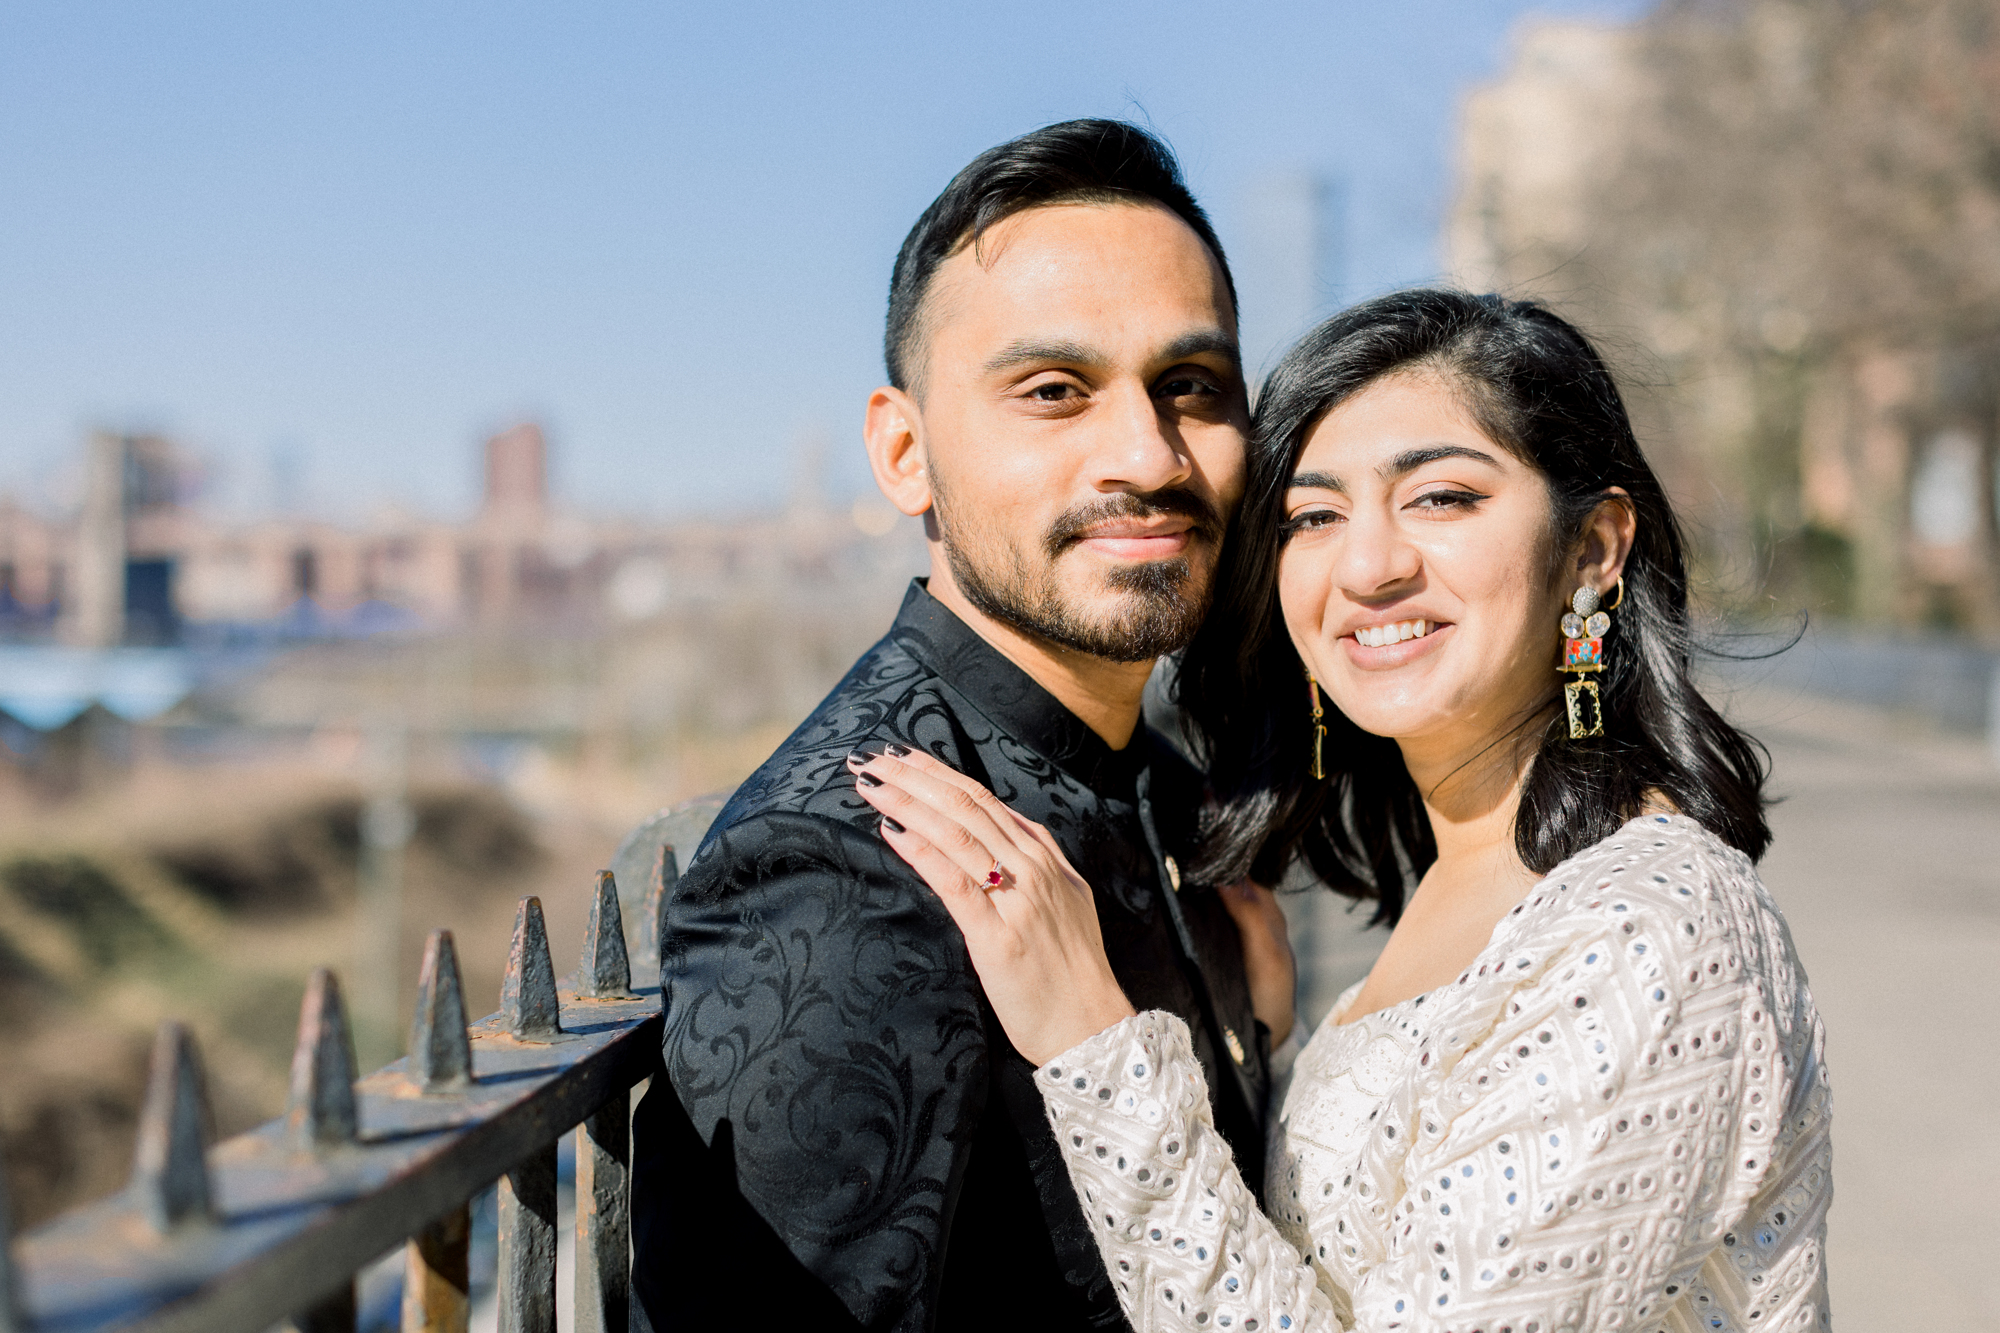 Beautiful and Wintery Brooklyn Heights Promenade Engagement Photos